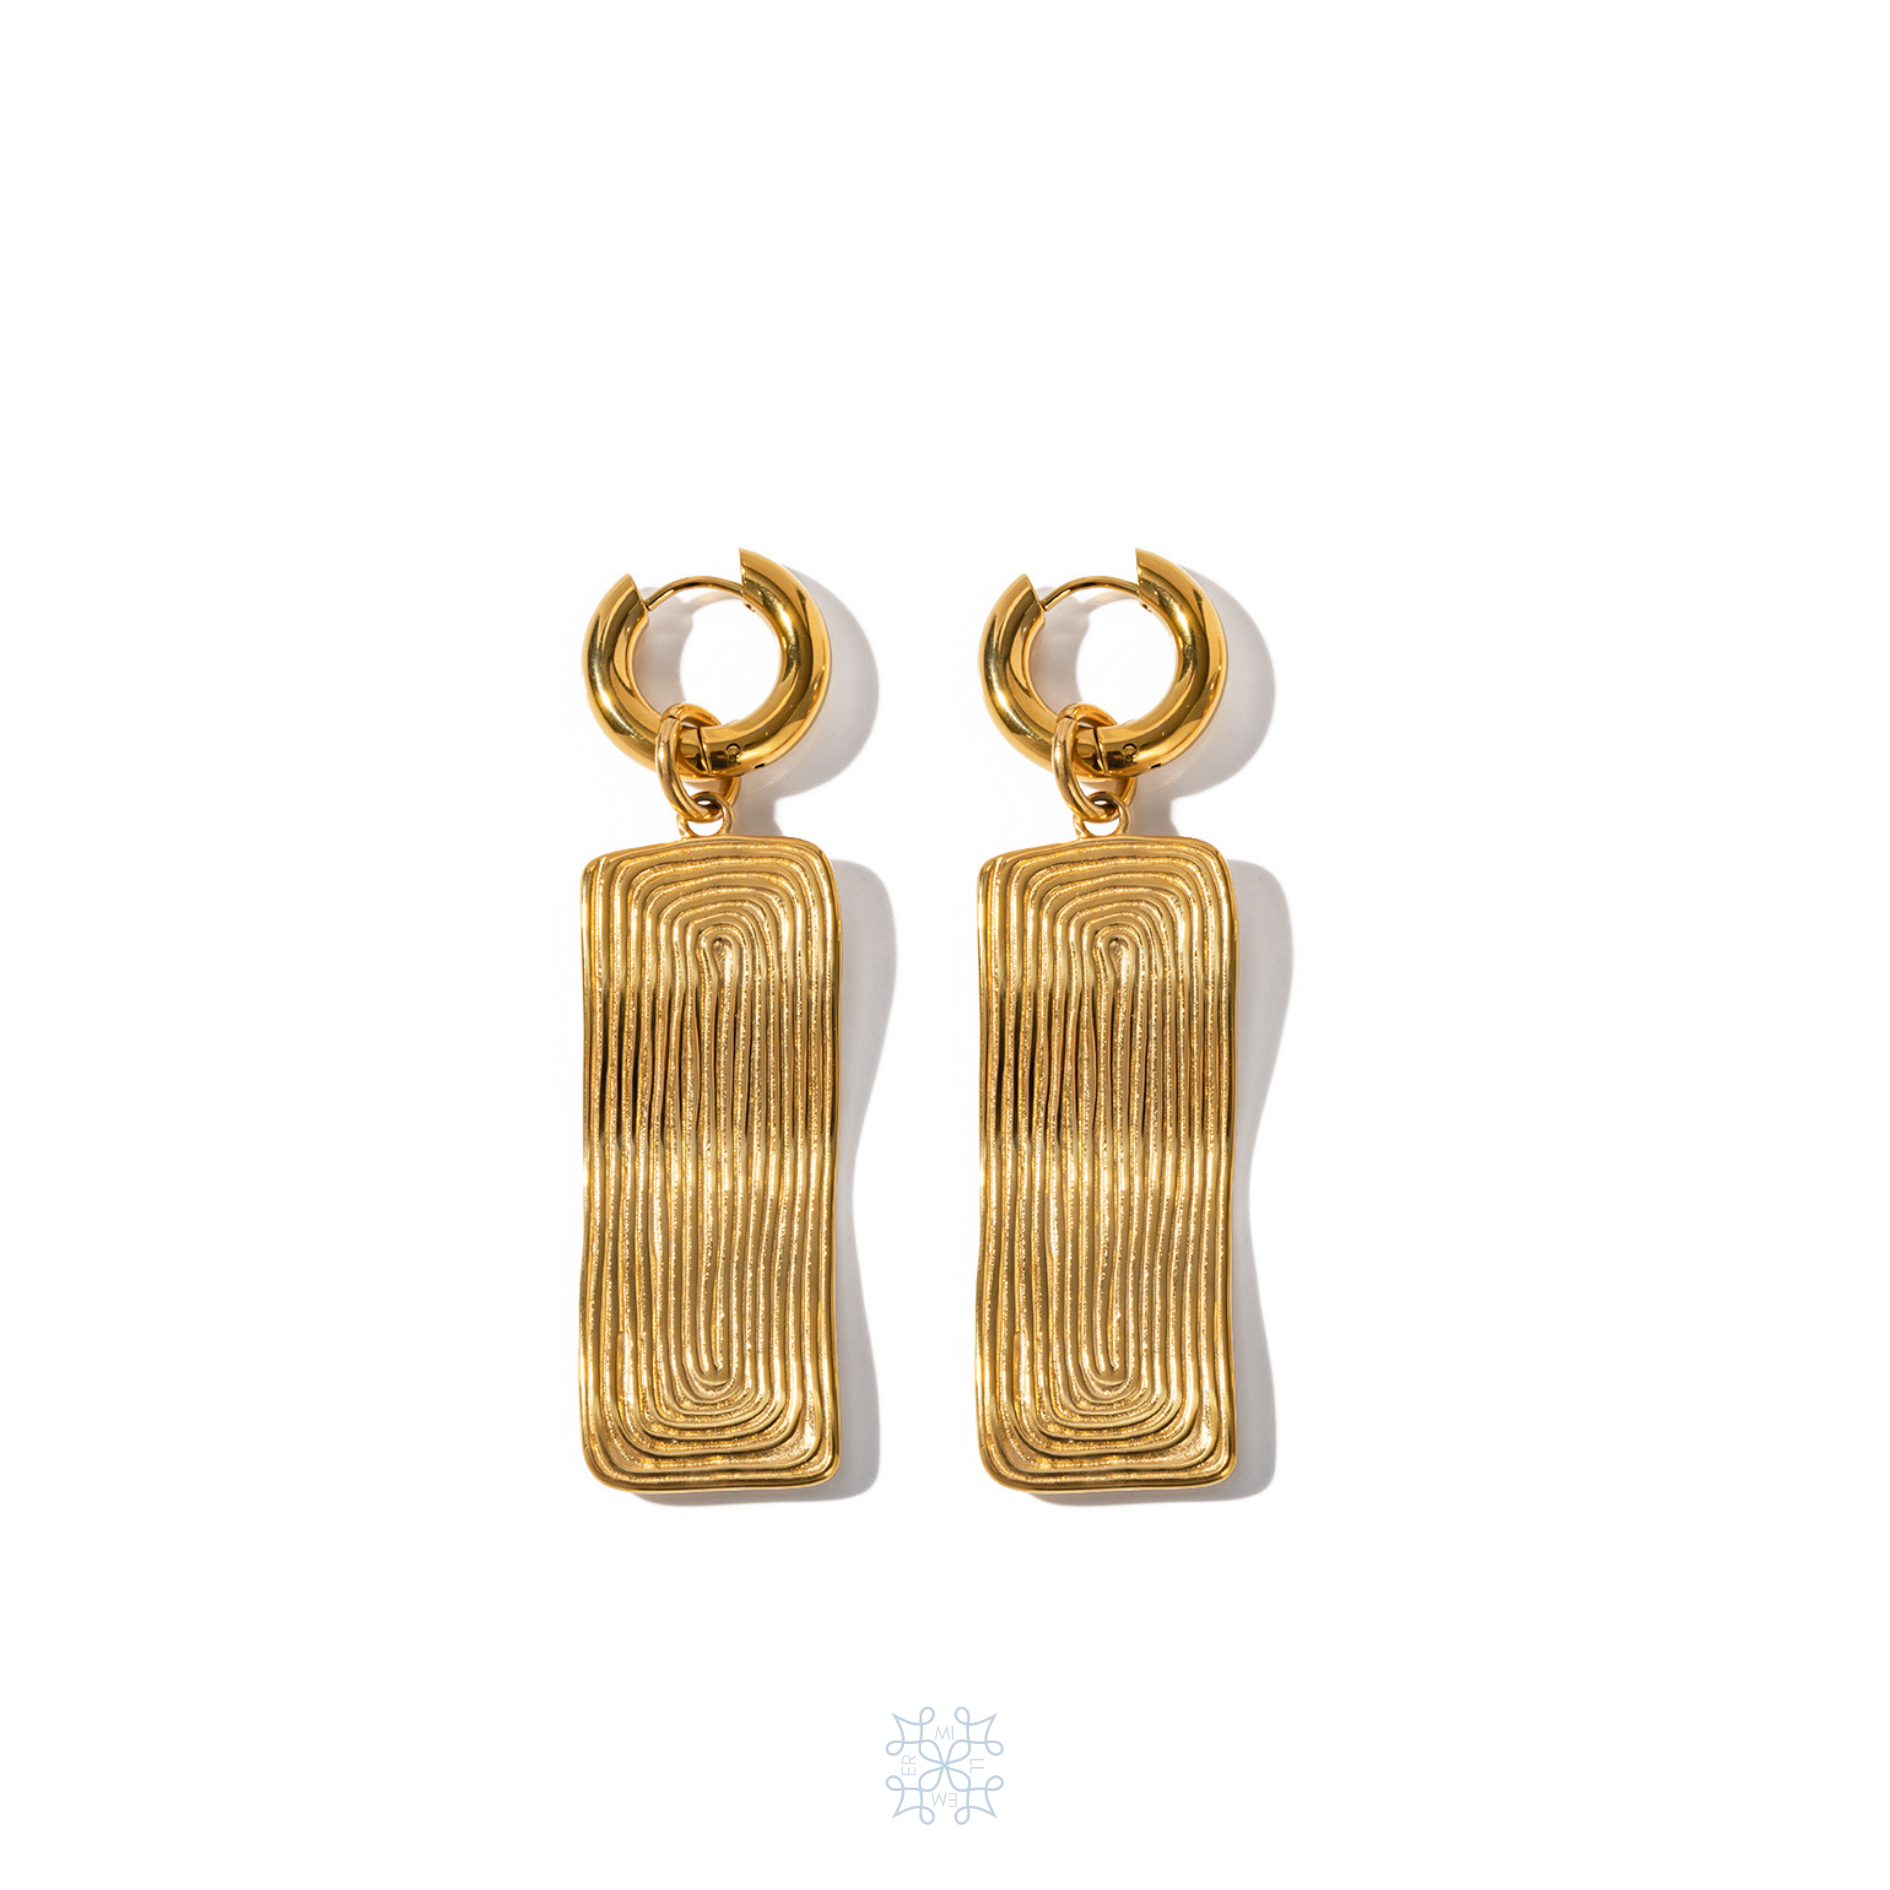 MAYA Gold Drop Earrings - GOLD Earrings, Small Hoop with a big gold rectangular shape drop attached to it.